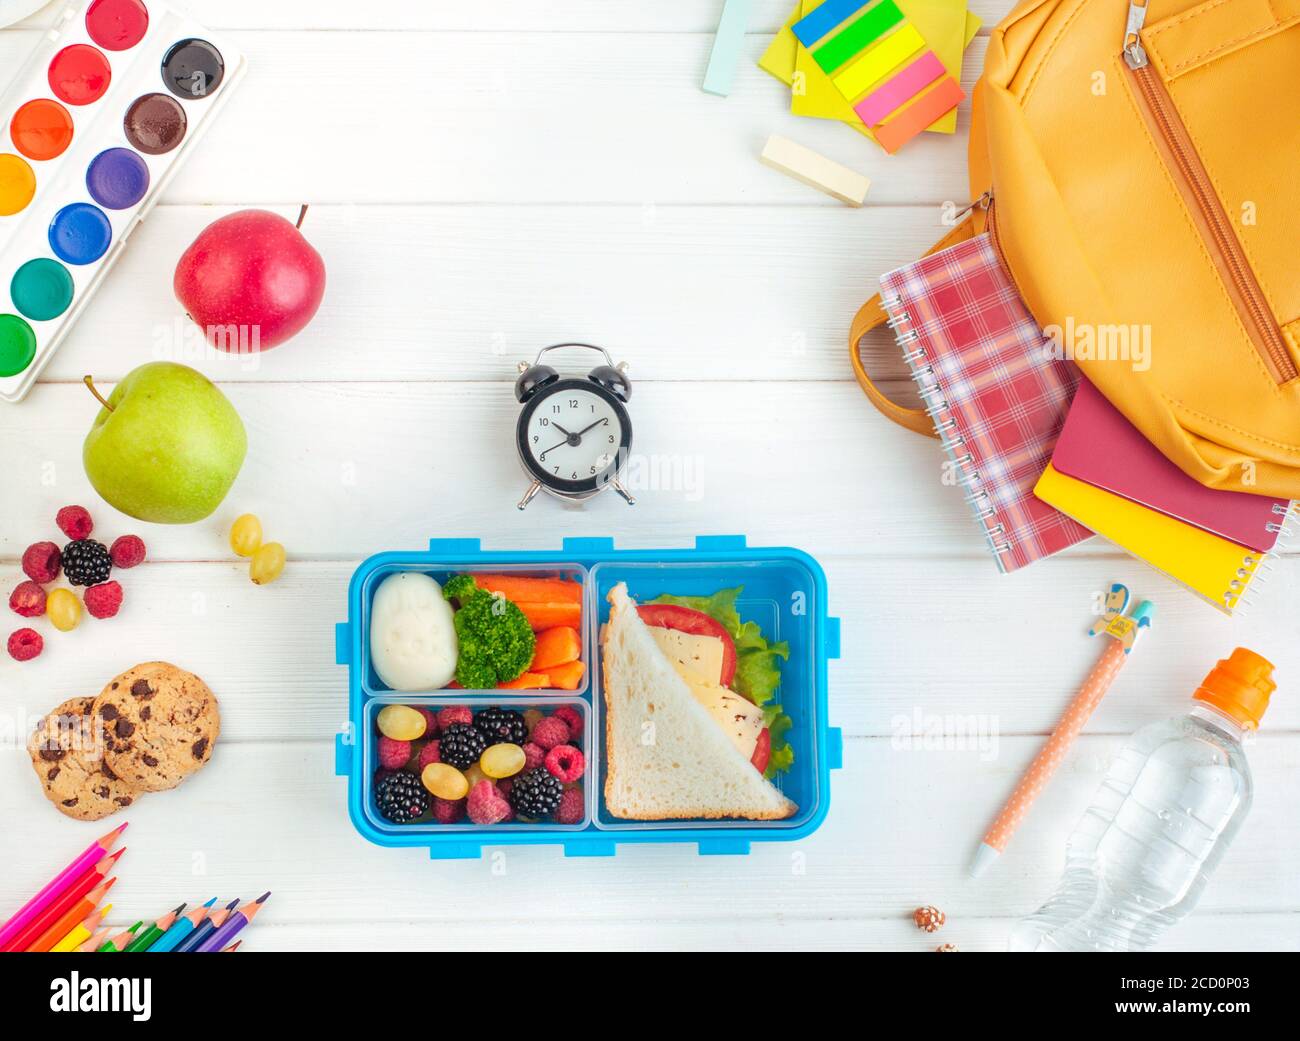 https://c8.alamy.com/comp/2CD0P03/open-lunch-box-with-sandwich-vegetables-egg-fresh-berries-on-the-white-wooden-background-near-clock-and-school-accessories-top-view-flat-lay-2CD0P03.jpg